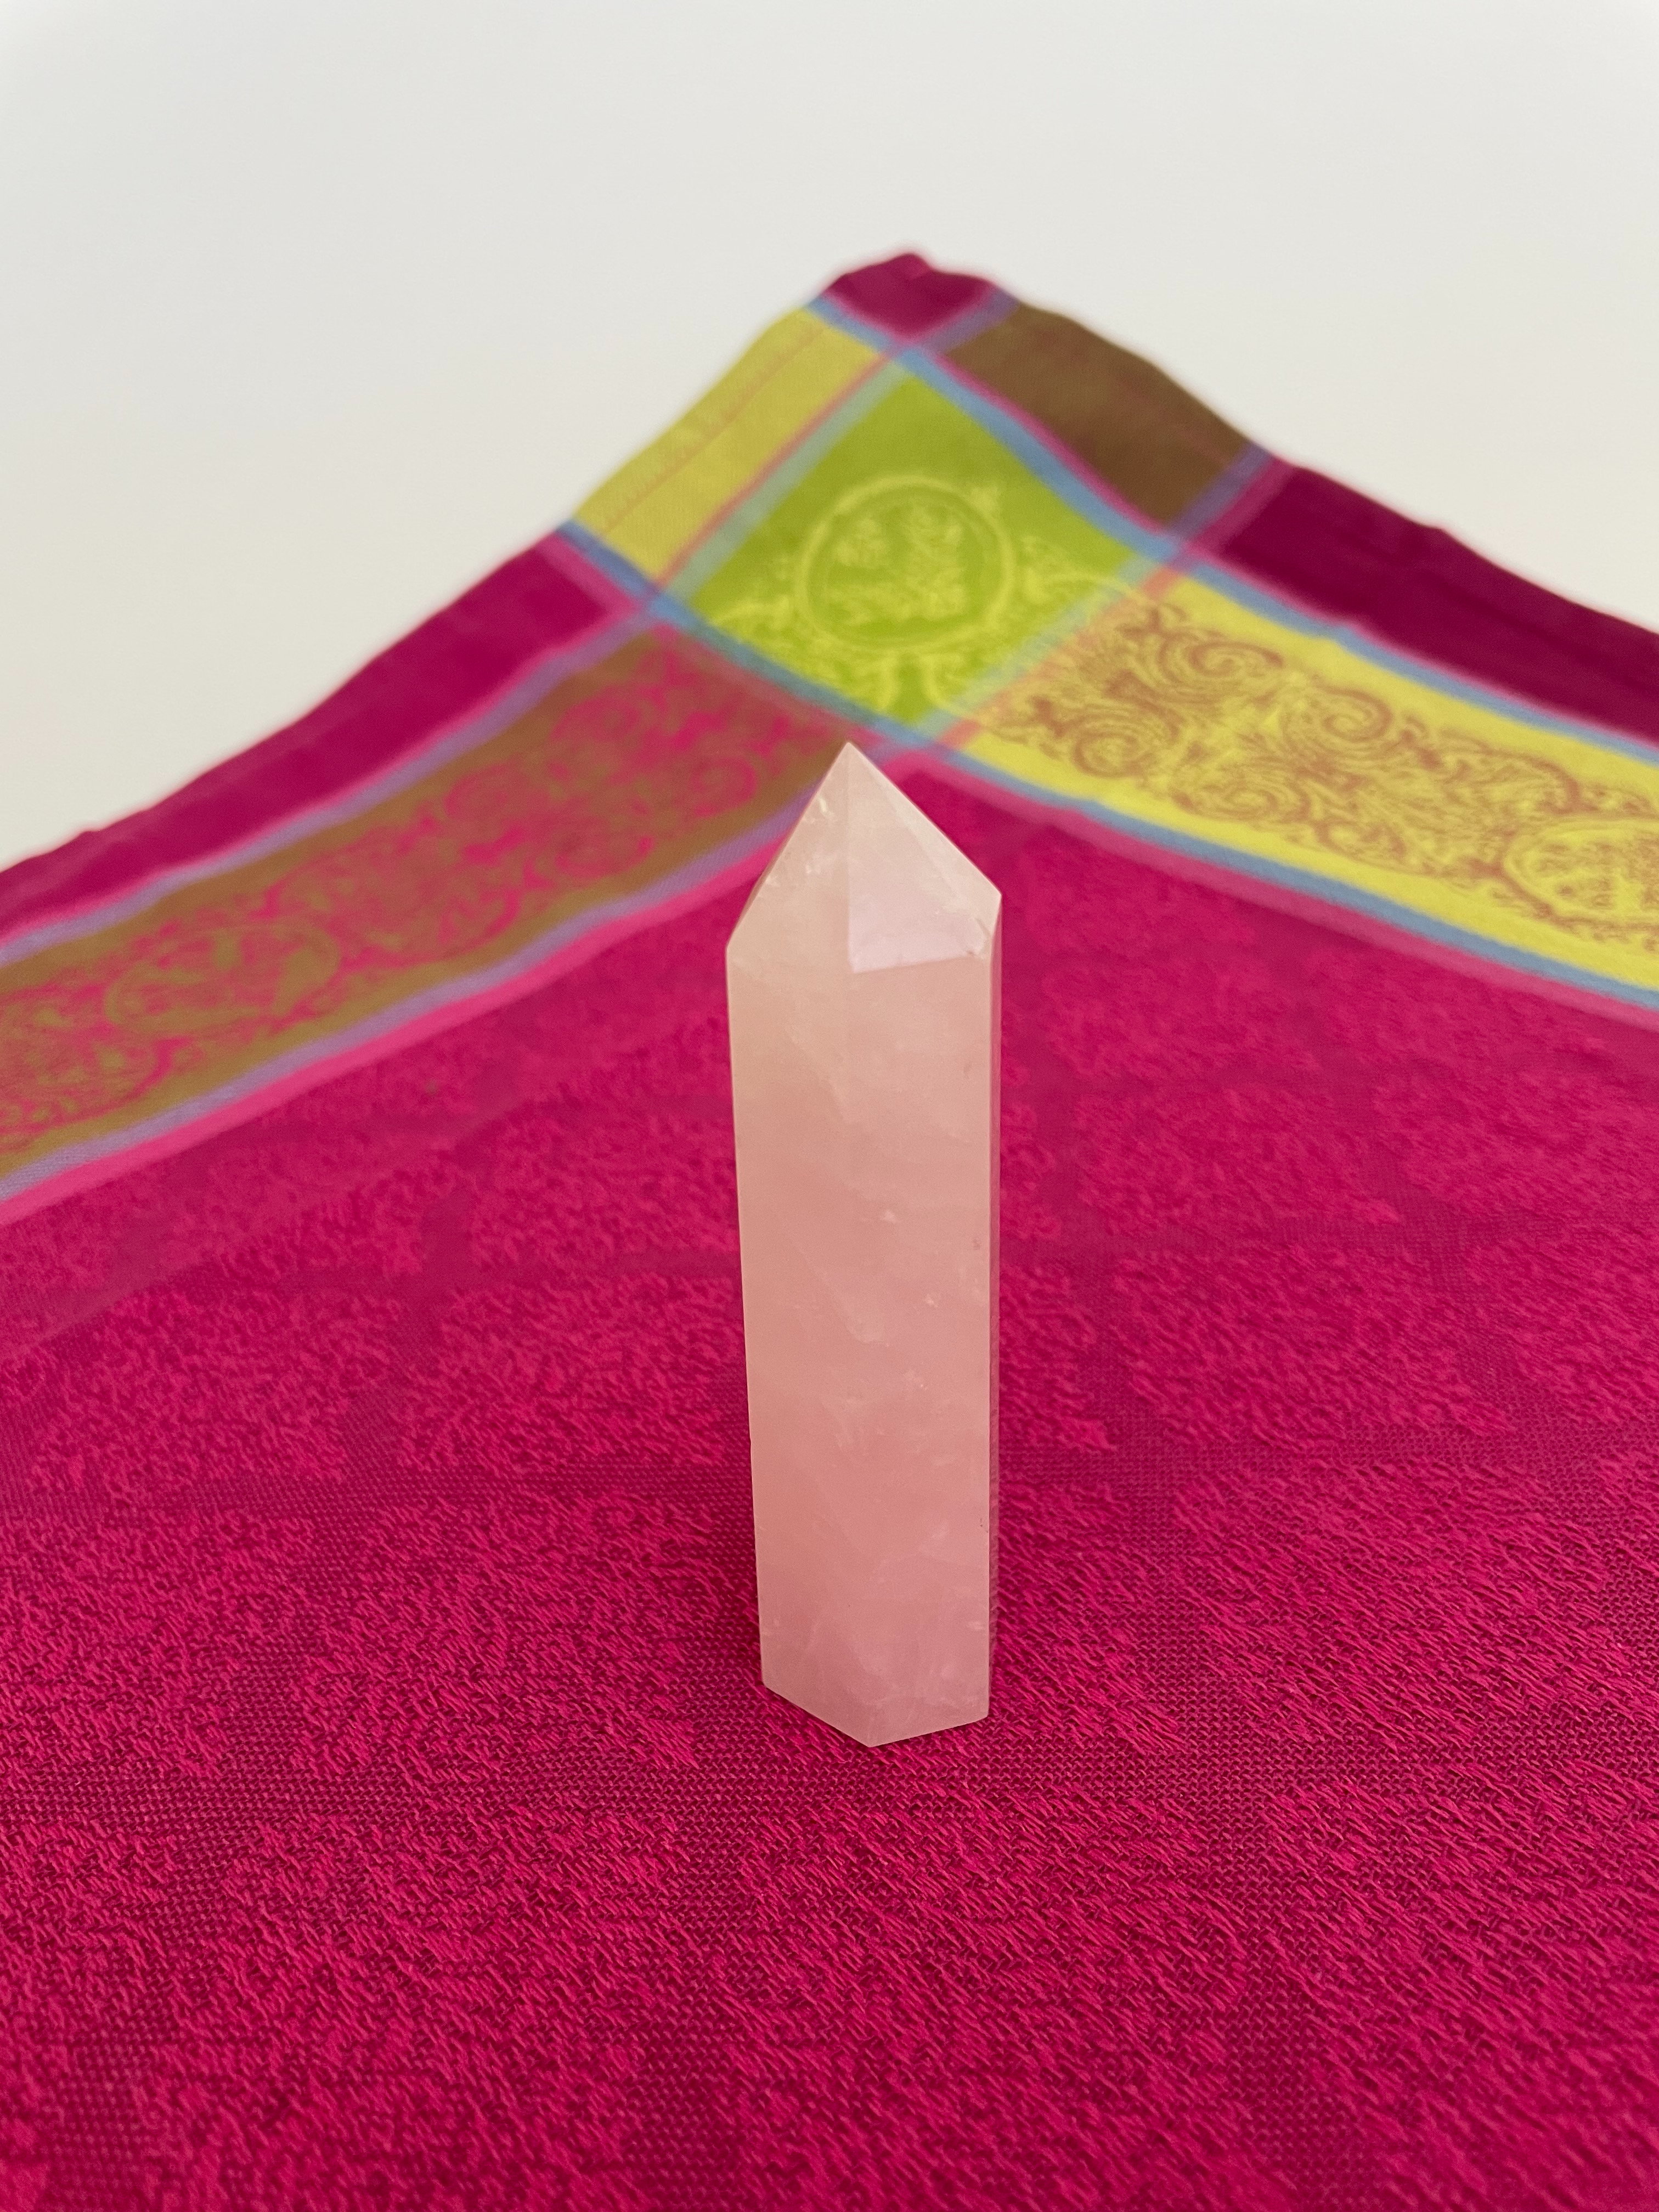 Alternate view. Rose Quartz tower of love 💗. Beautiful rose quartz tower for your altar, for healing or as décor for any room in your home or office. Rose quartz is the ultimate love stone, for love of all types - to attract love and for self-love. It is soothing, enhances compassion, is the best emotional healer, dispels negative energy, opens your heart and so much more. Place this rose quartz tower in your space to radiate a loving vibe all day long. The tower is approximately 3½" long. Cost is $14.